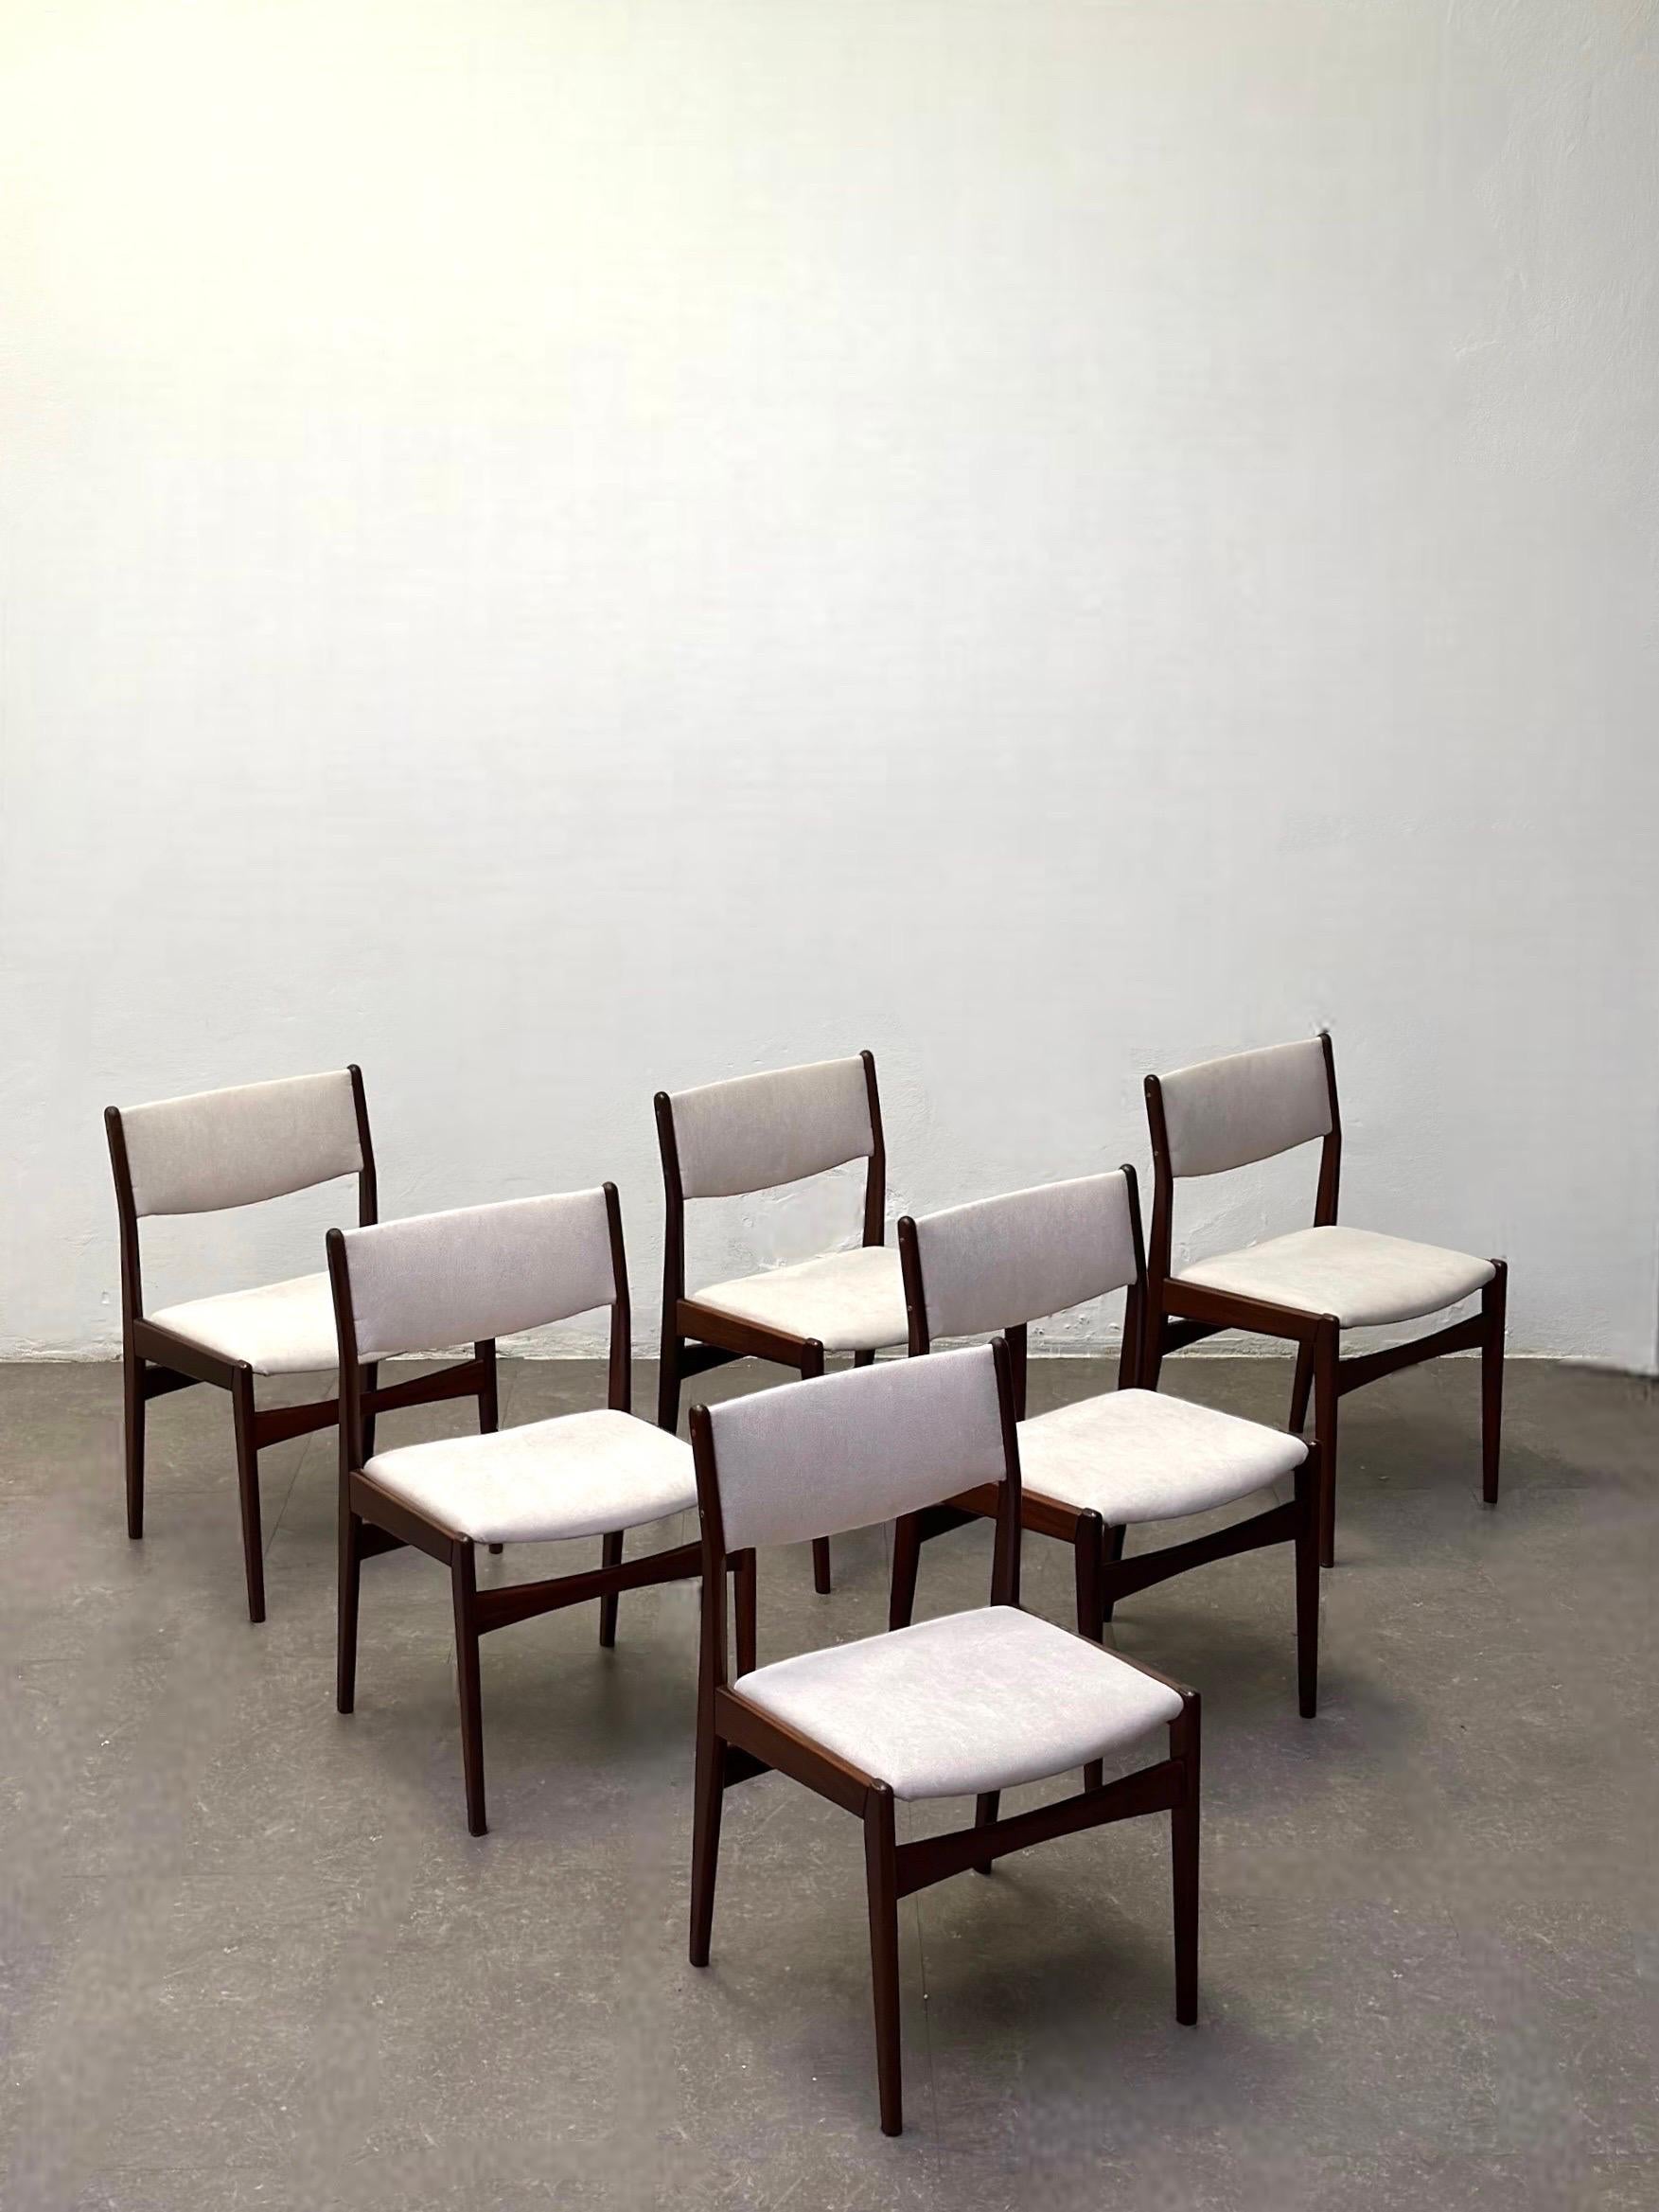 Vintage Poul Volther Dining Chairs - Danish Mid-Century Elegance

Immerse yourself in the timeless allure of mid-century Danish design with this stunning set of 6 dining chairs by the legendary Poul Volther, crafted for Frem Røjle in the 1960s.